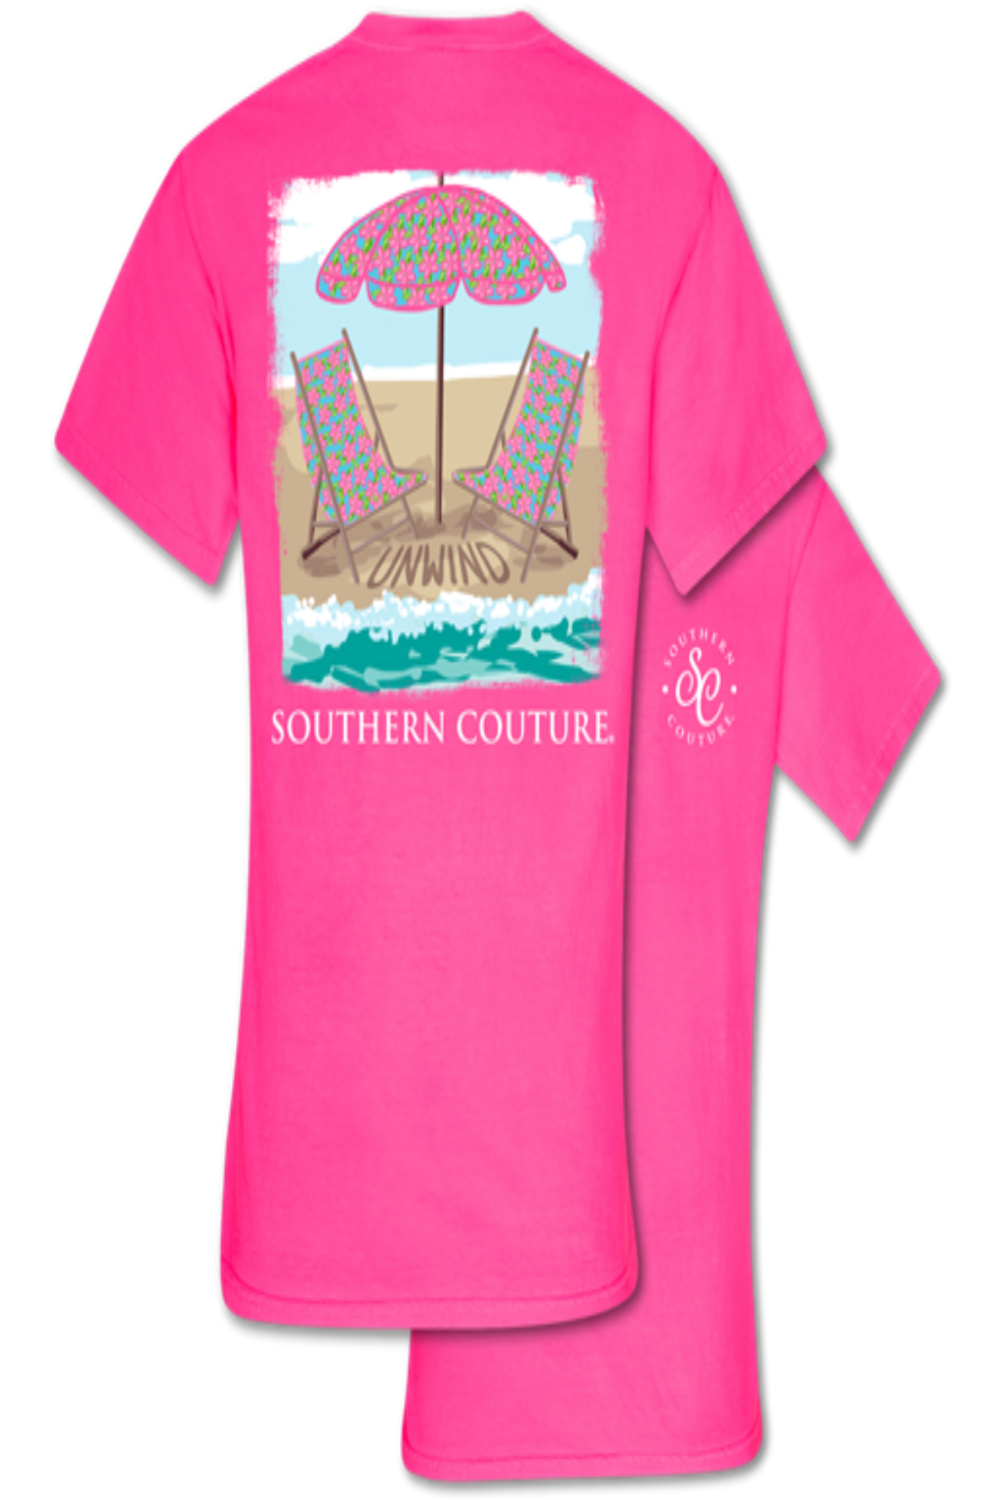 Unwind Beach Chairs - Short Sleeve T-Shirt by Southern Couture